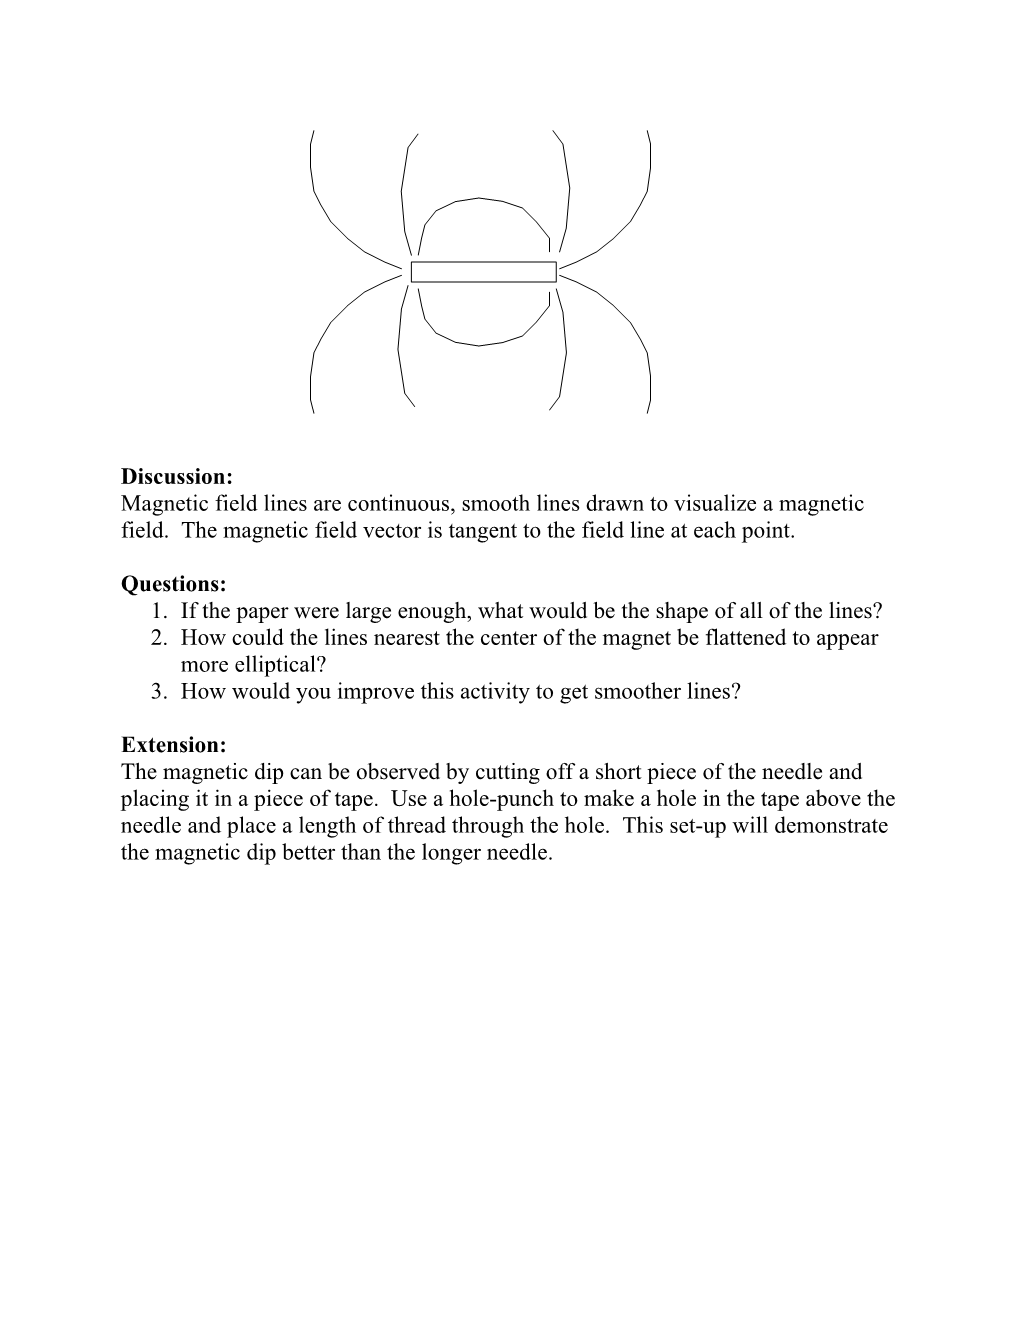 Exercise: Mapping a Magnetic Field